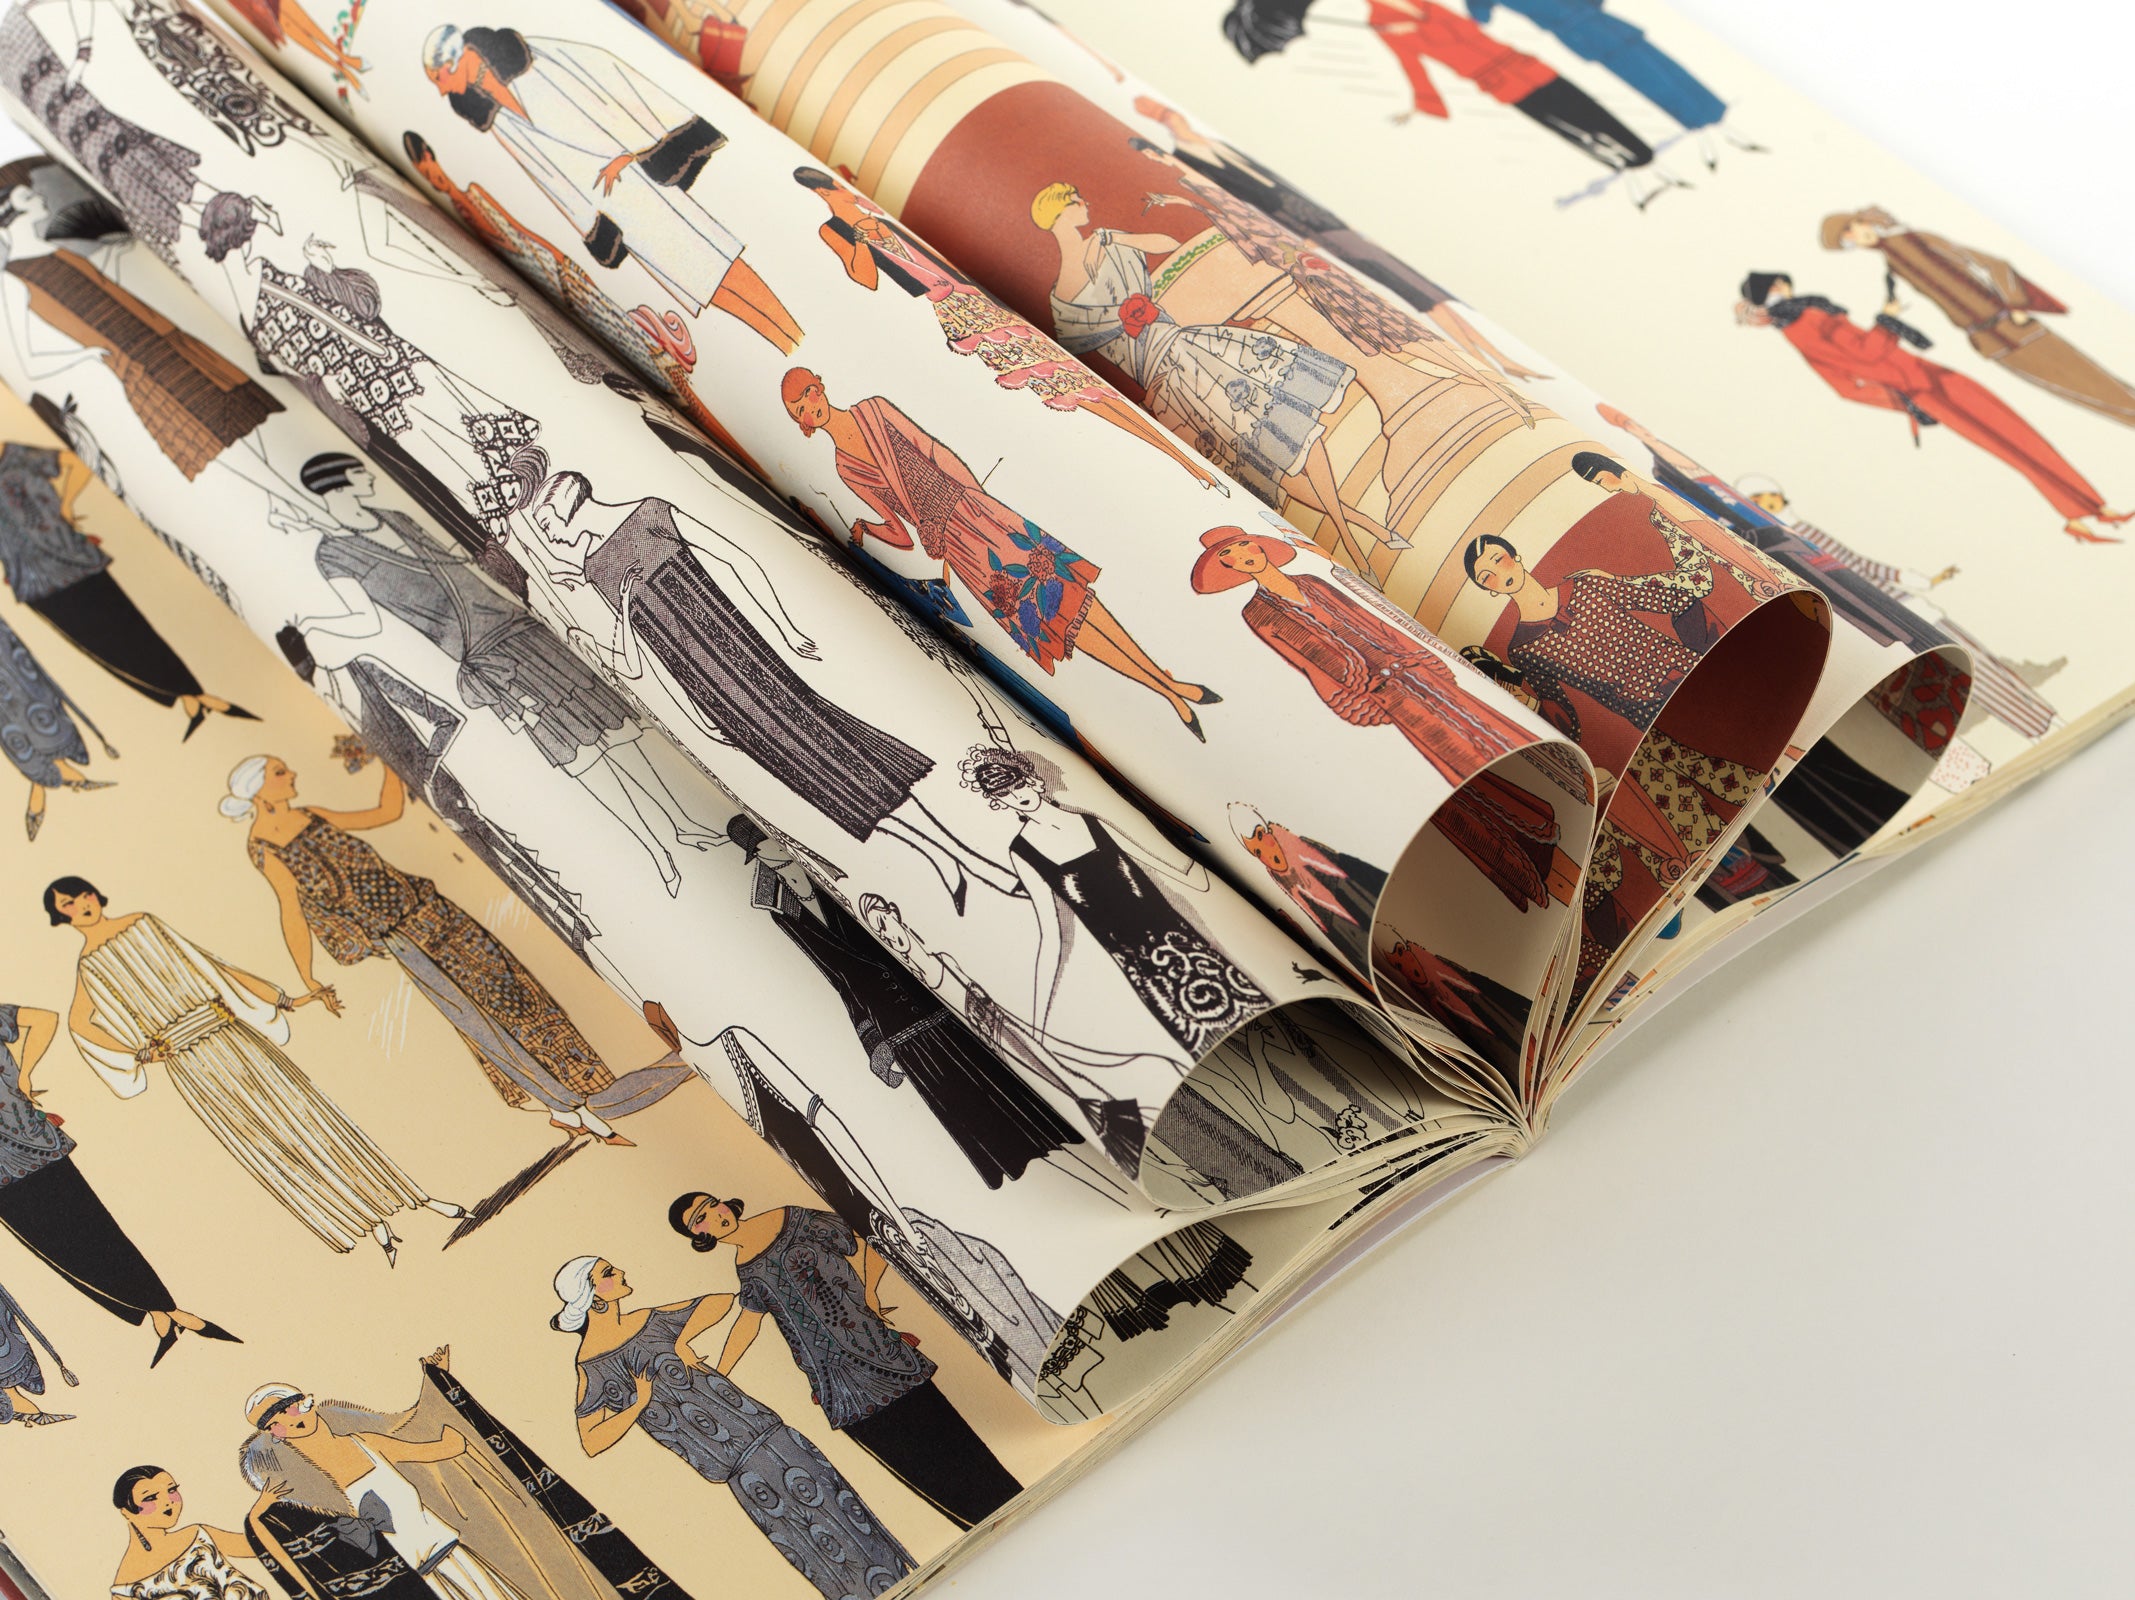 Gift & creative papers - 1920s Fashion